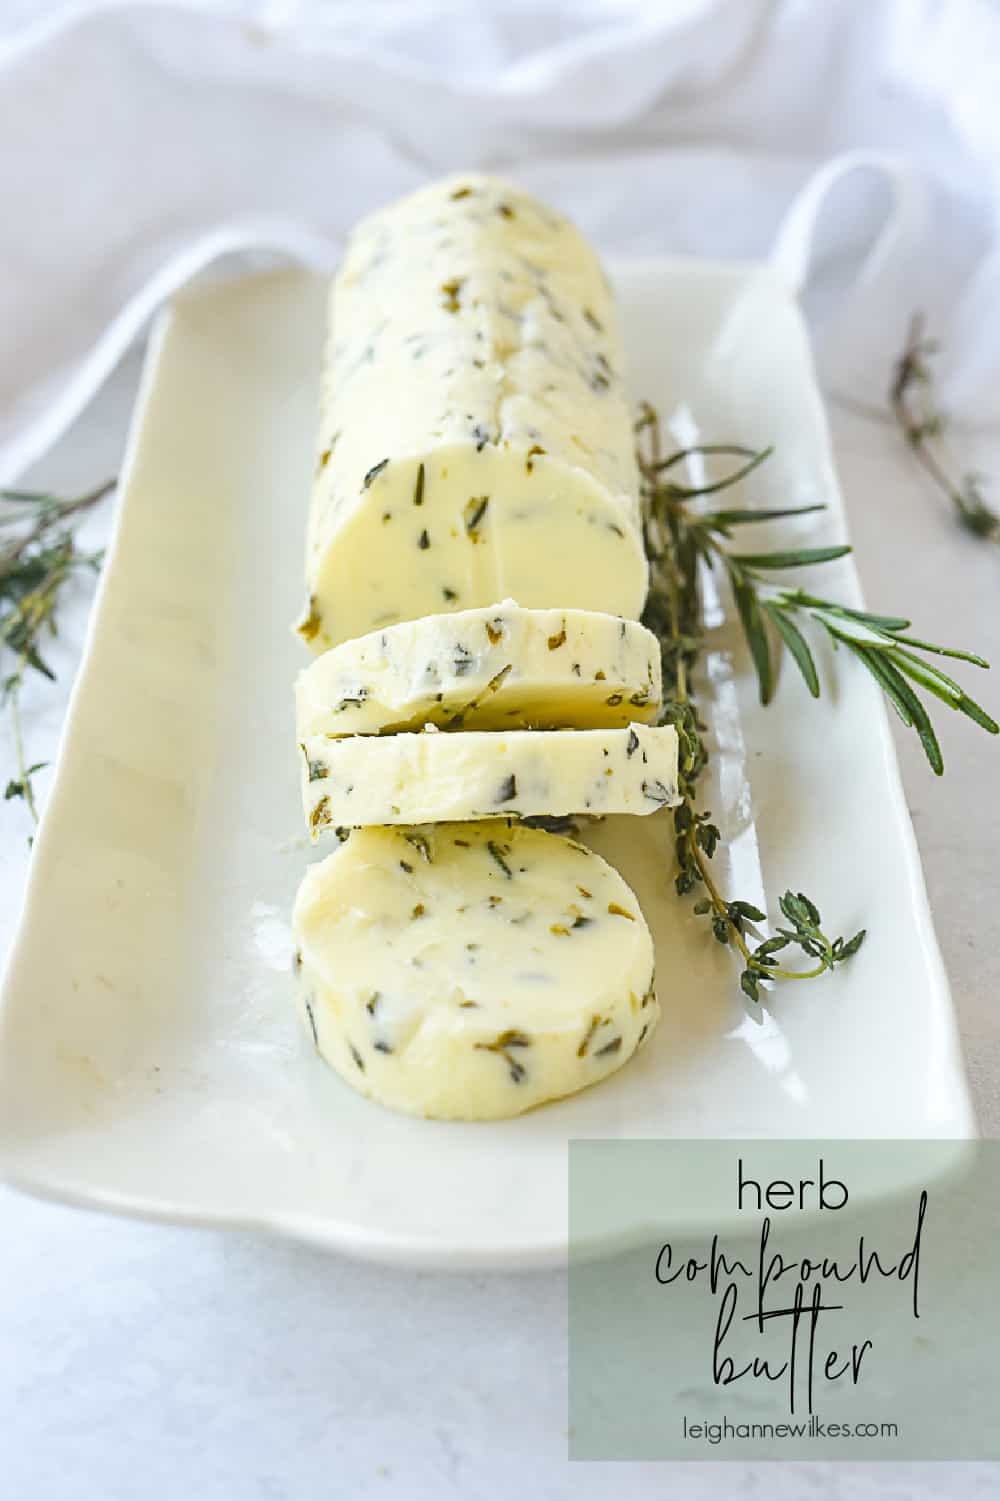 sliced herb compound butter